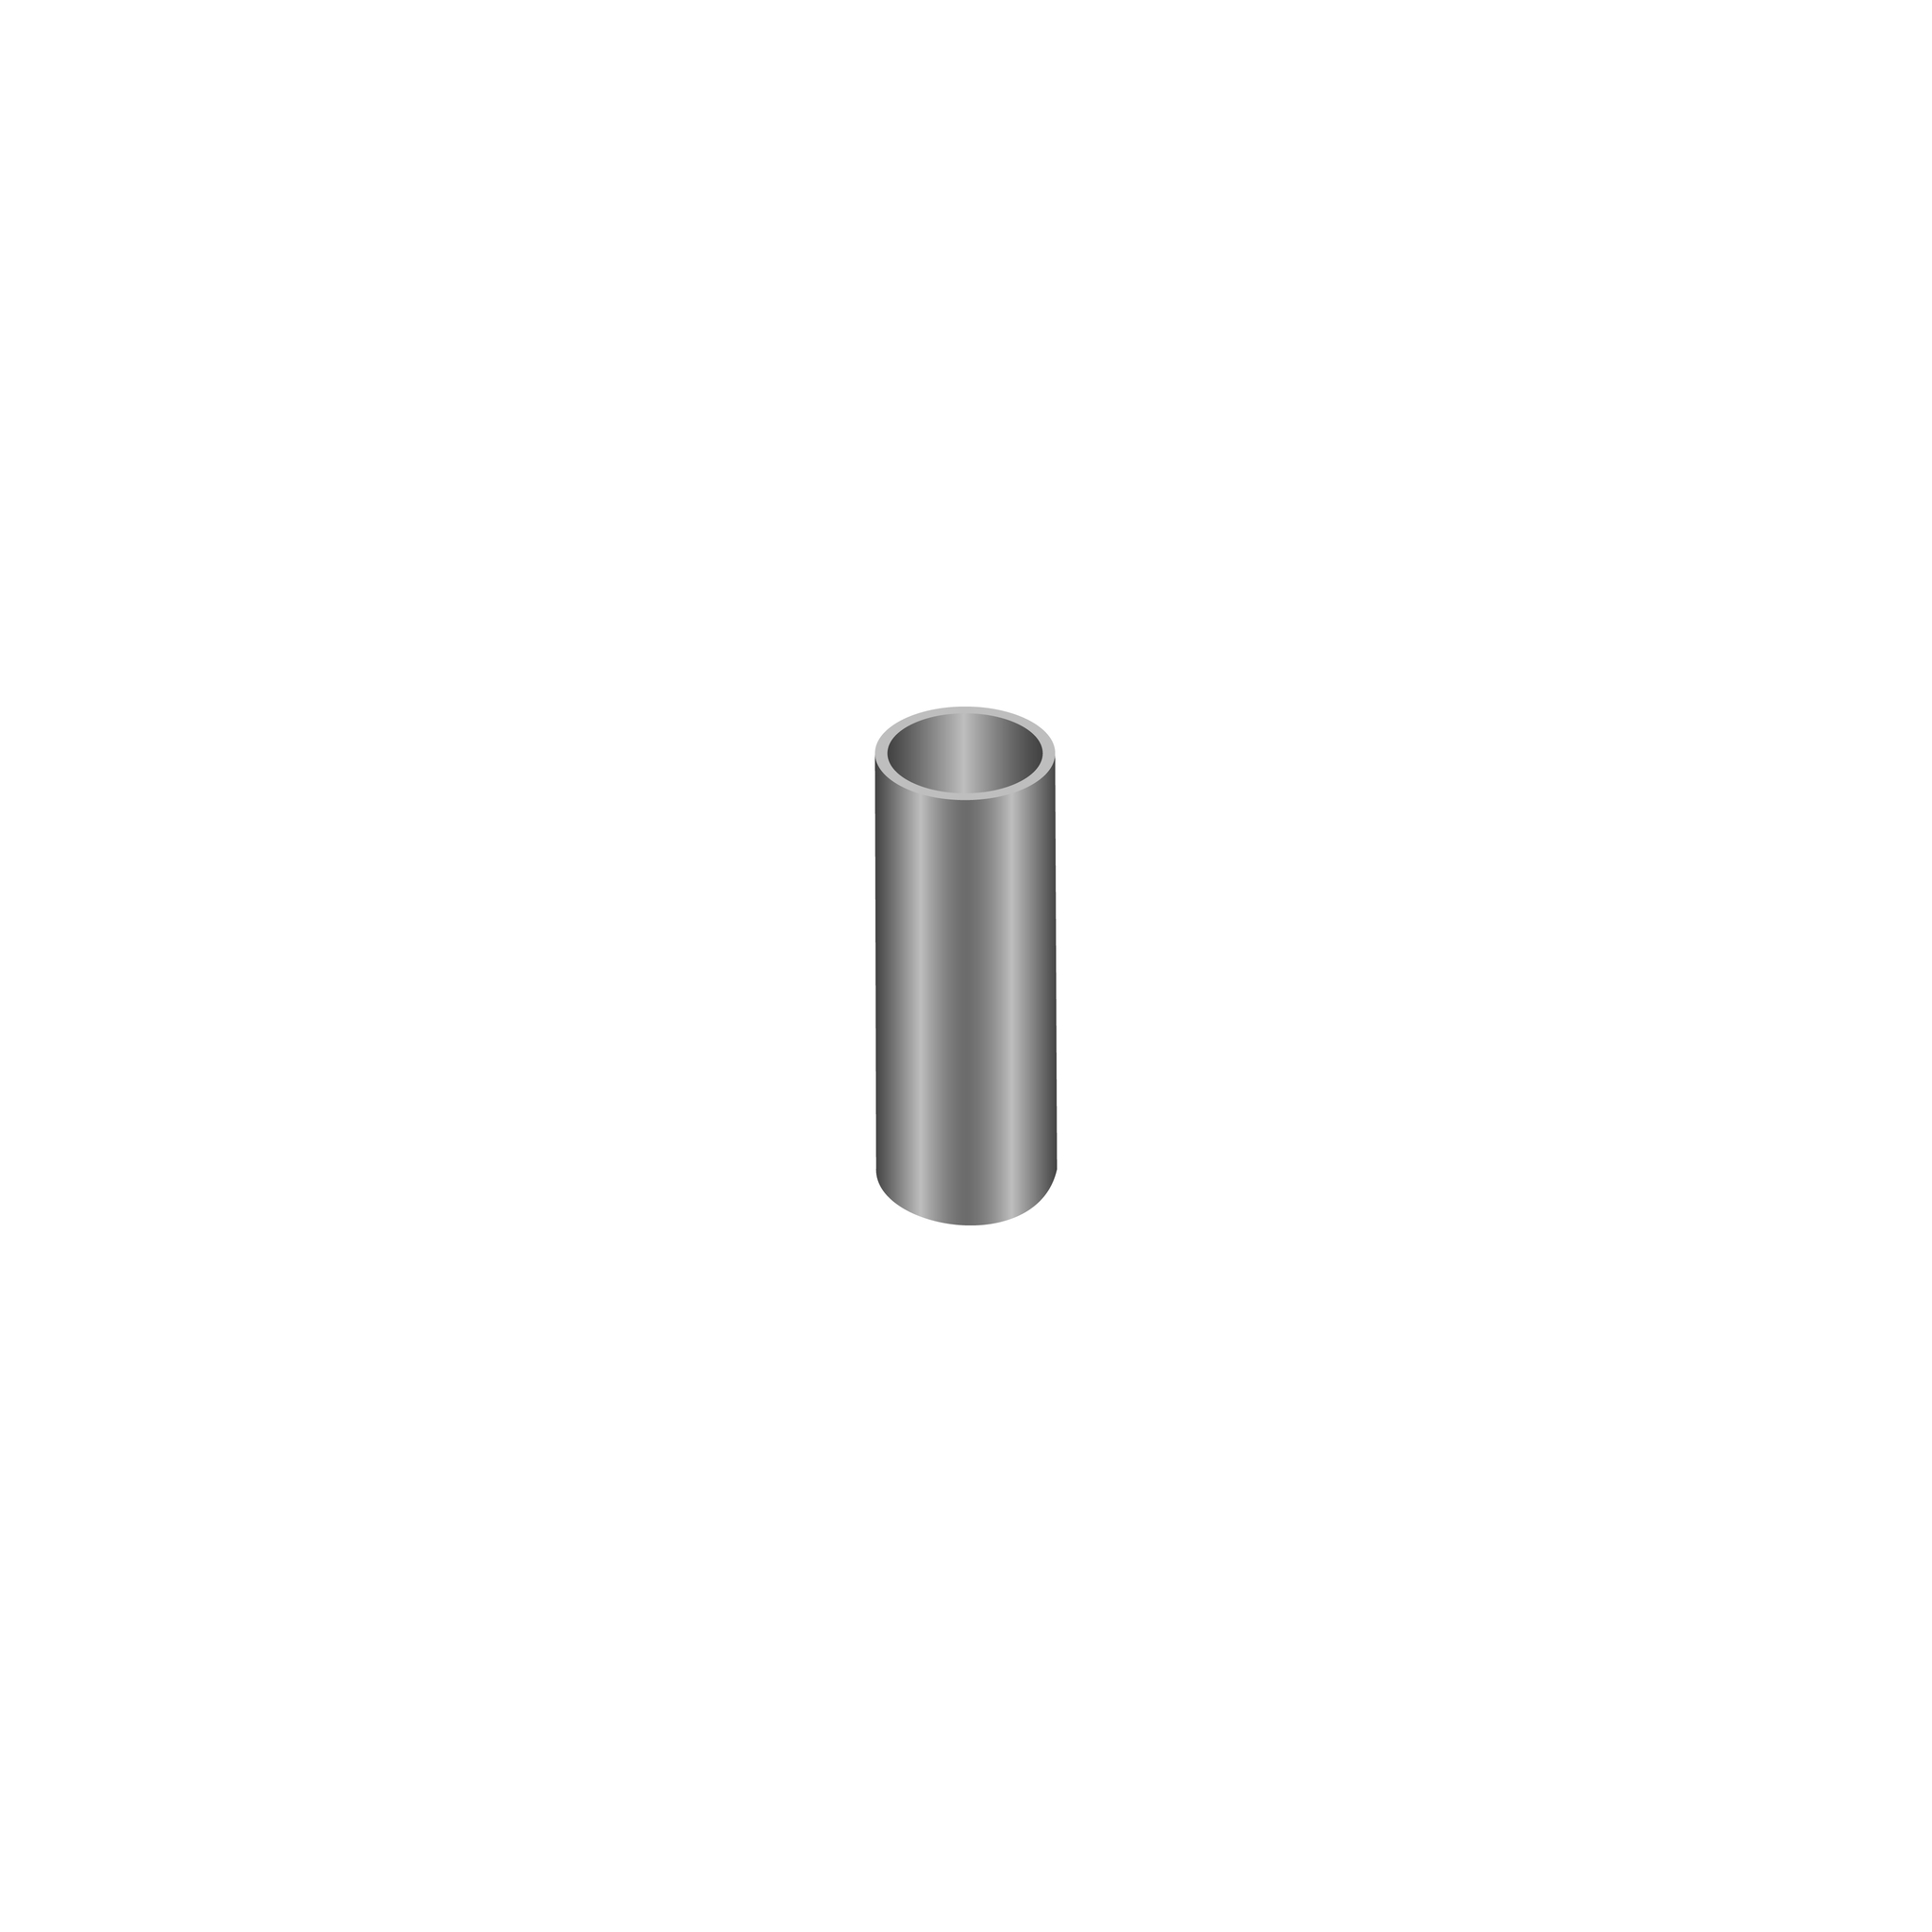 Straight Guide Sleeve - Without Cleat - 2.0 mm x 6.0 mm